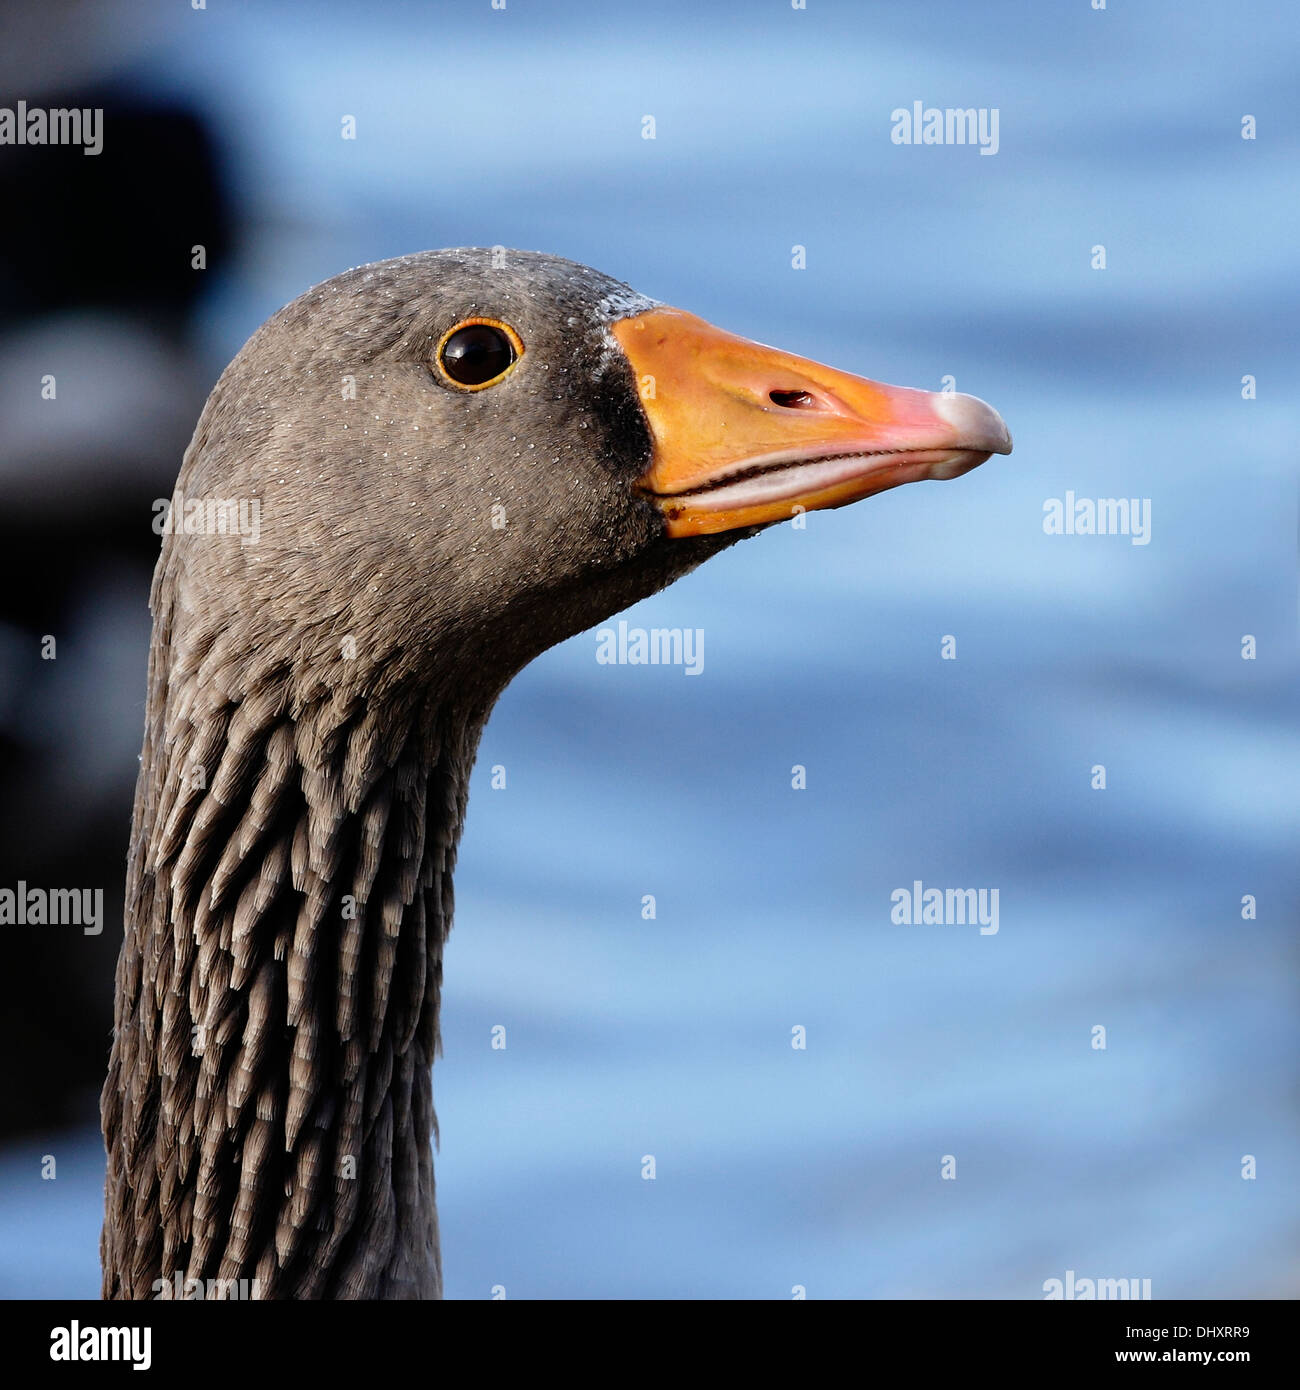 A portrait of an alert looking Greylag Goose (Anser anser). Stock Photo